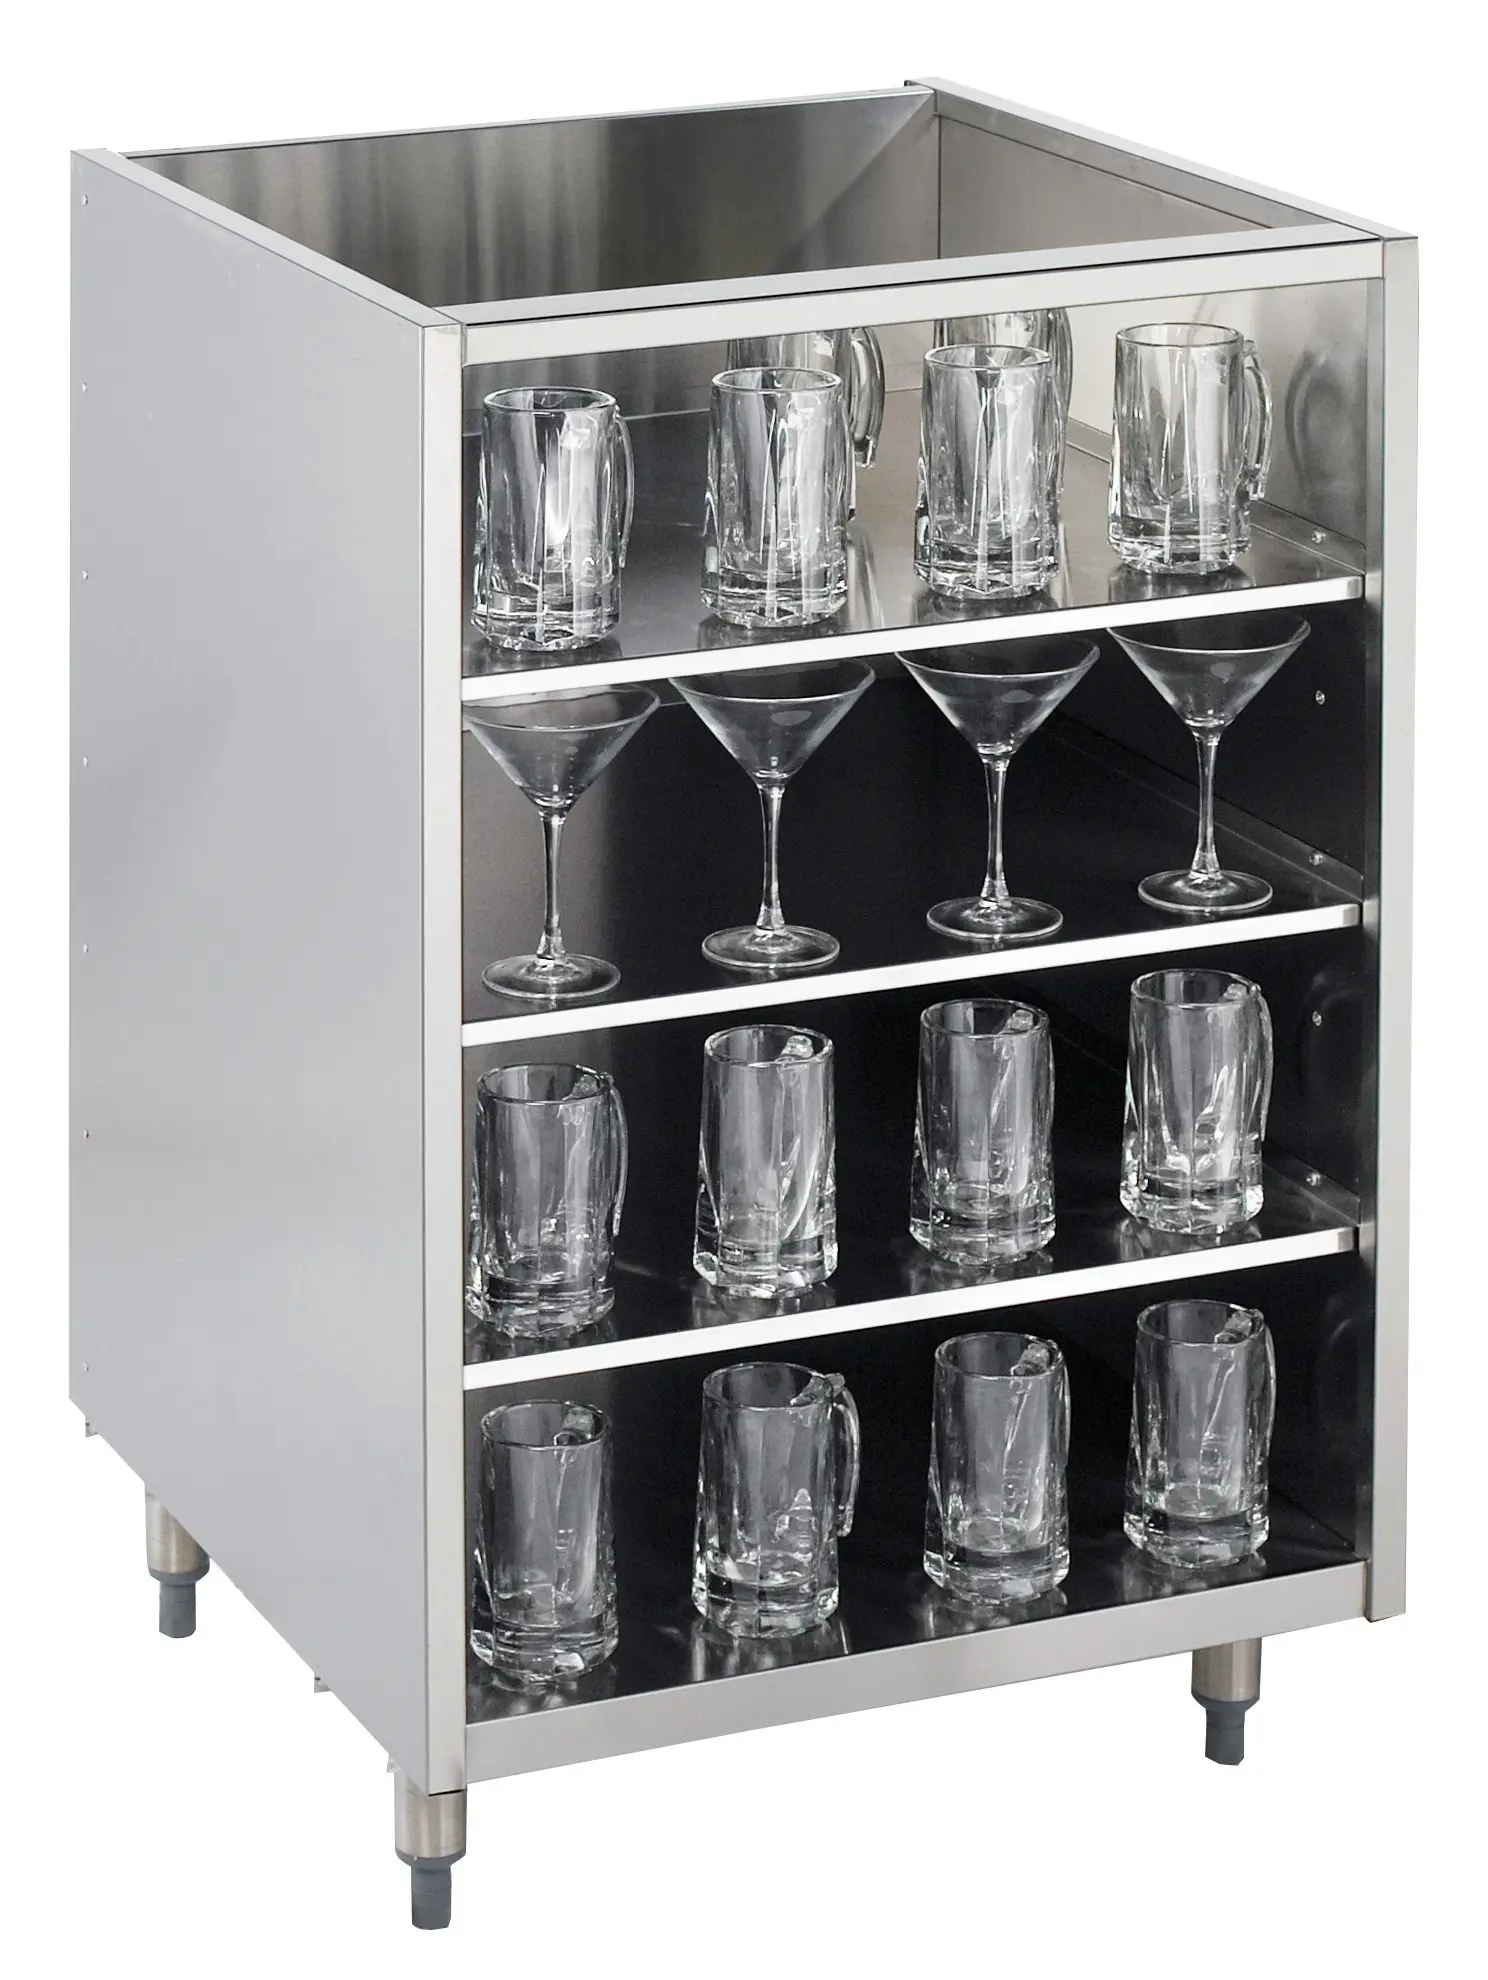 Krowne Metal KR-G18 18"W Underbar Glass Storage Cabinet Without Top - Picture 1 of 1